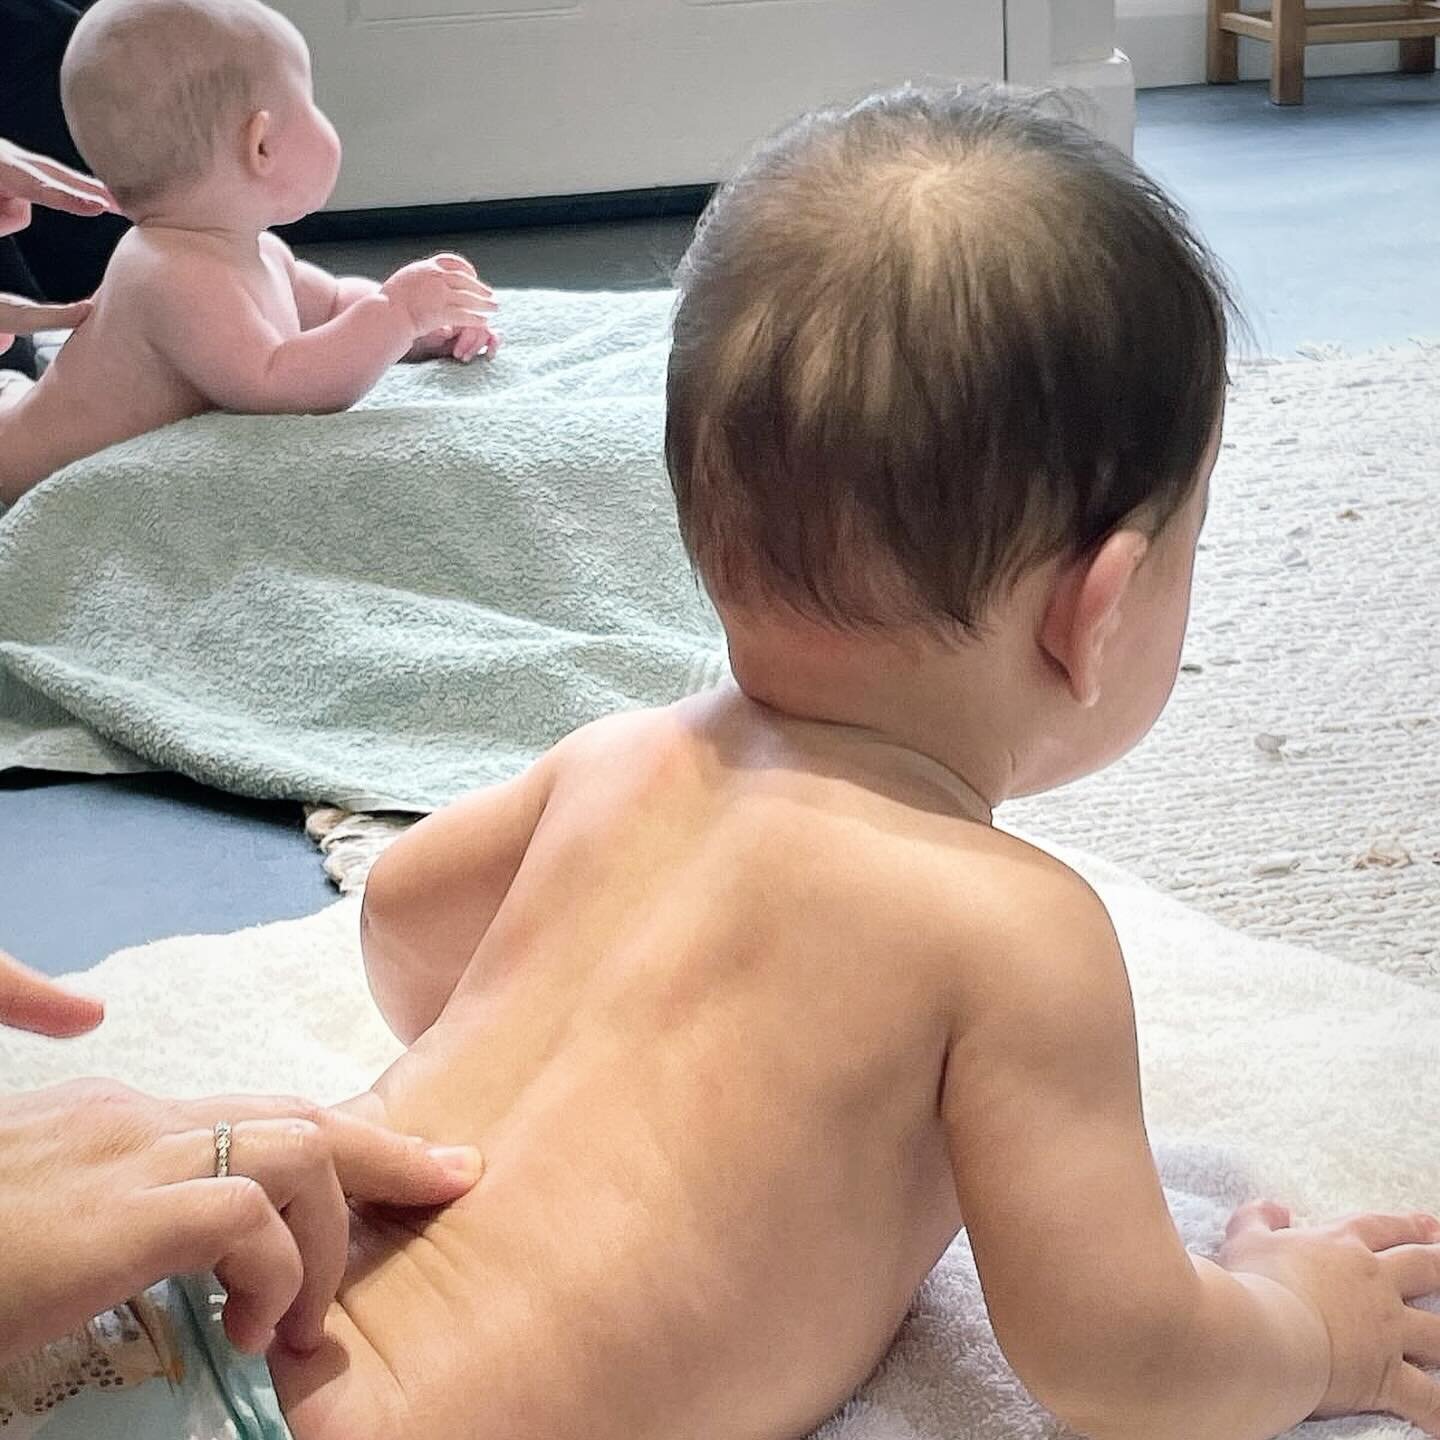 The families we support have had access to 4 weeks of FREE baby massage and sensory sessions hosted by Kirsty from @feelgoodmh and funded by @kcc_kent 

During these sessions the families have been able to understand the benefit of massage which has 